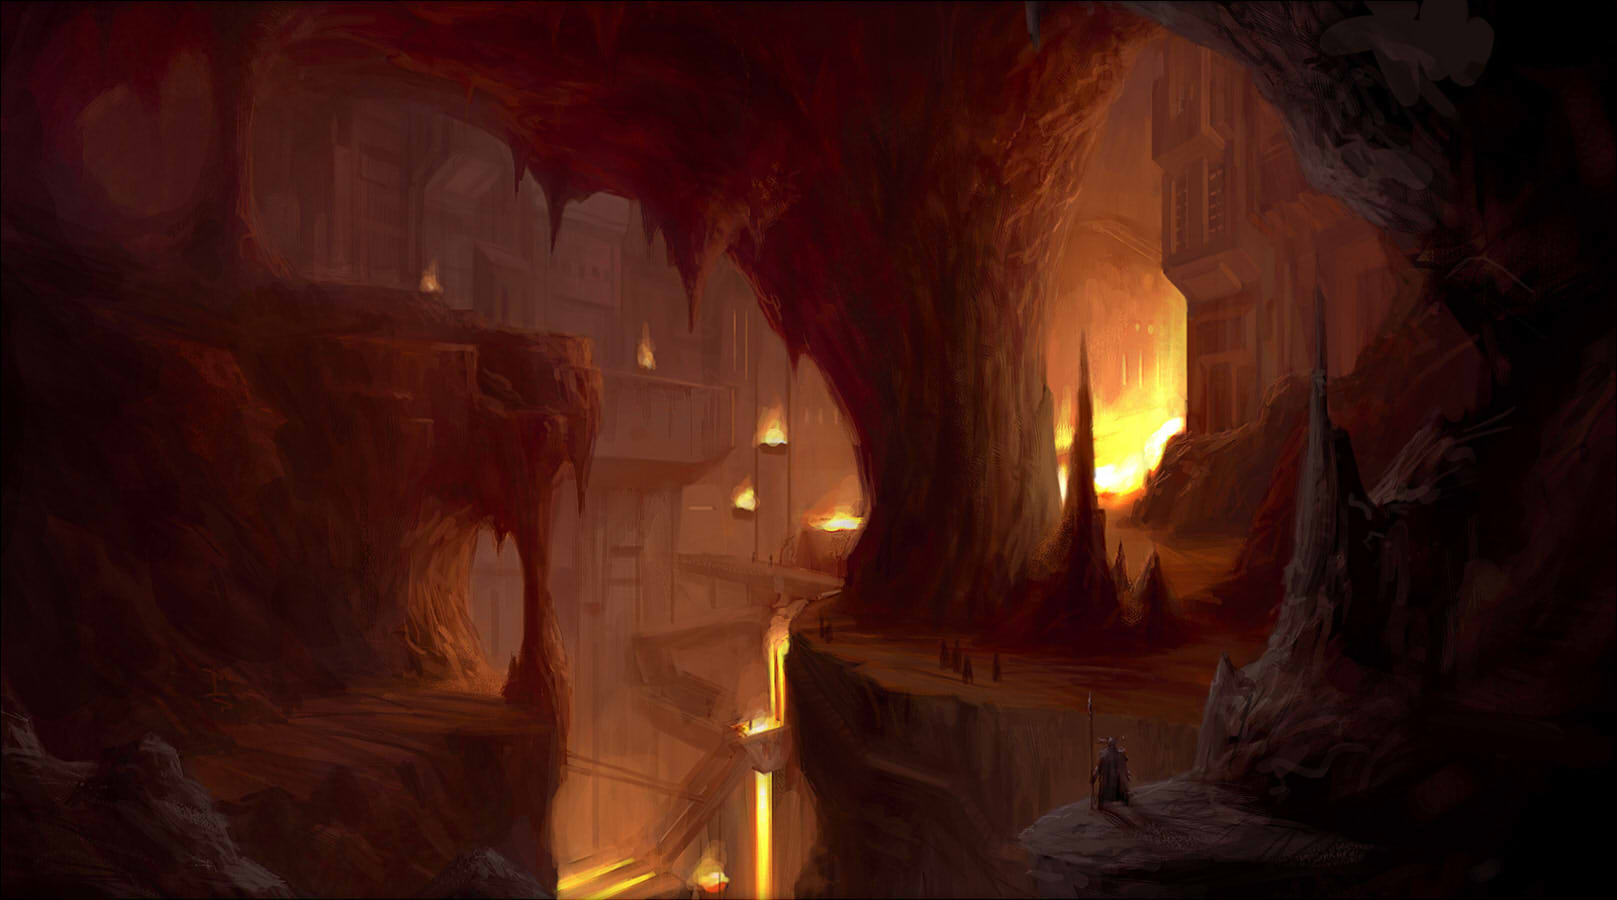 190-1906171_cave-caves-fantasy-city-cities-wallpapers-hd-lava.jpg